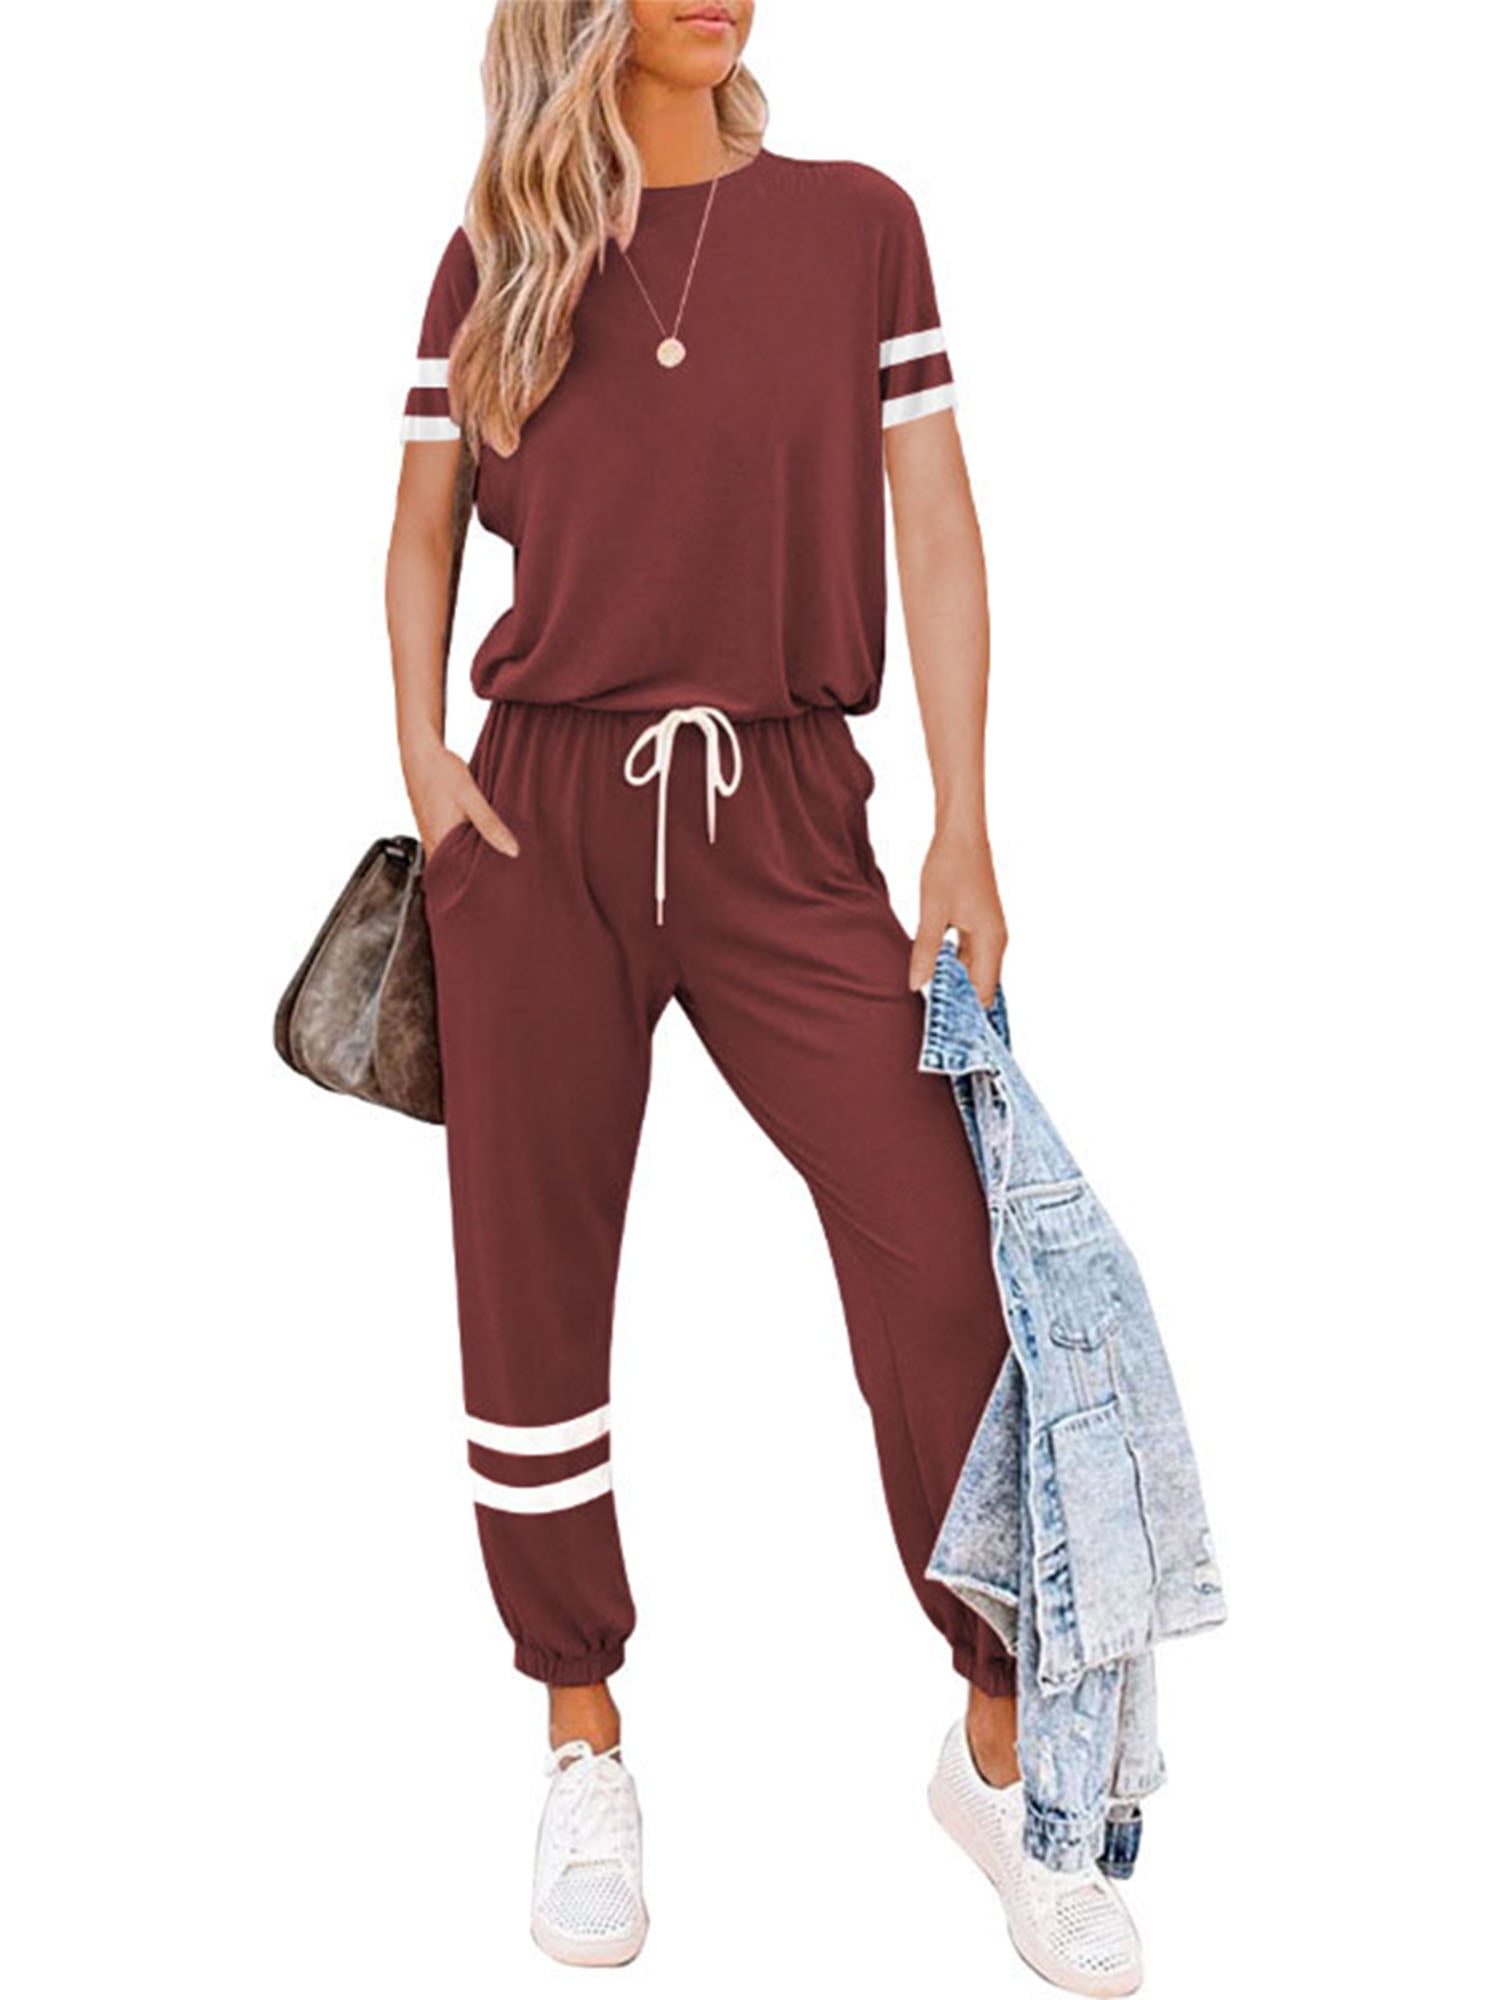 Short Set Sweatsuit Tracksuits with Pocket Women Casual Solid Loose Drawstring Two Piece Outfits Sets 